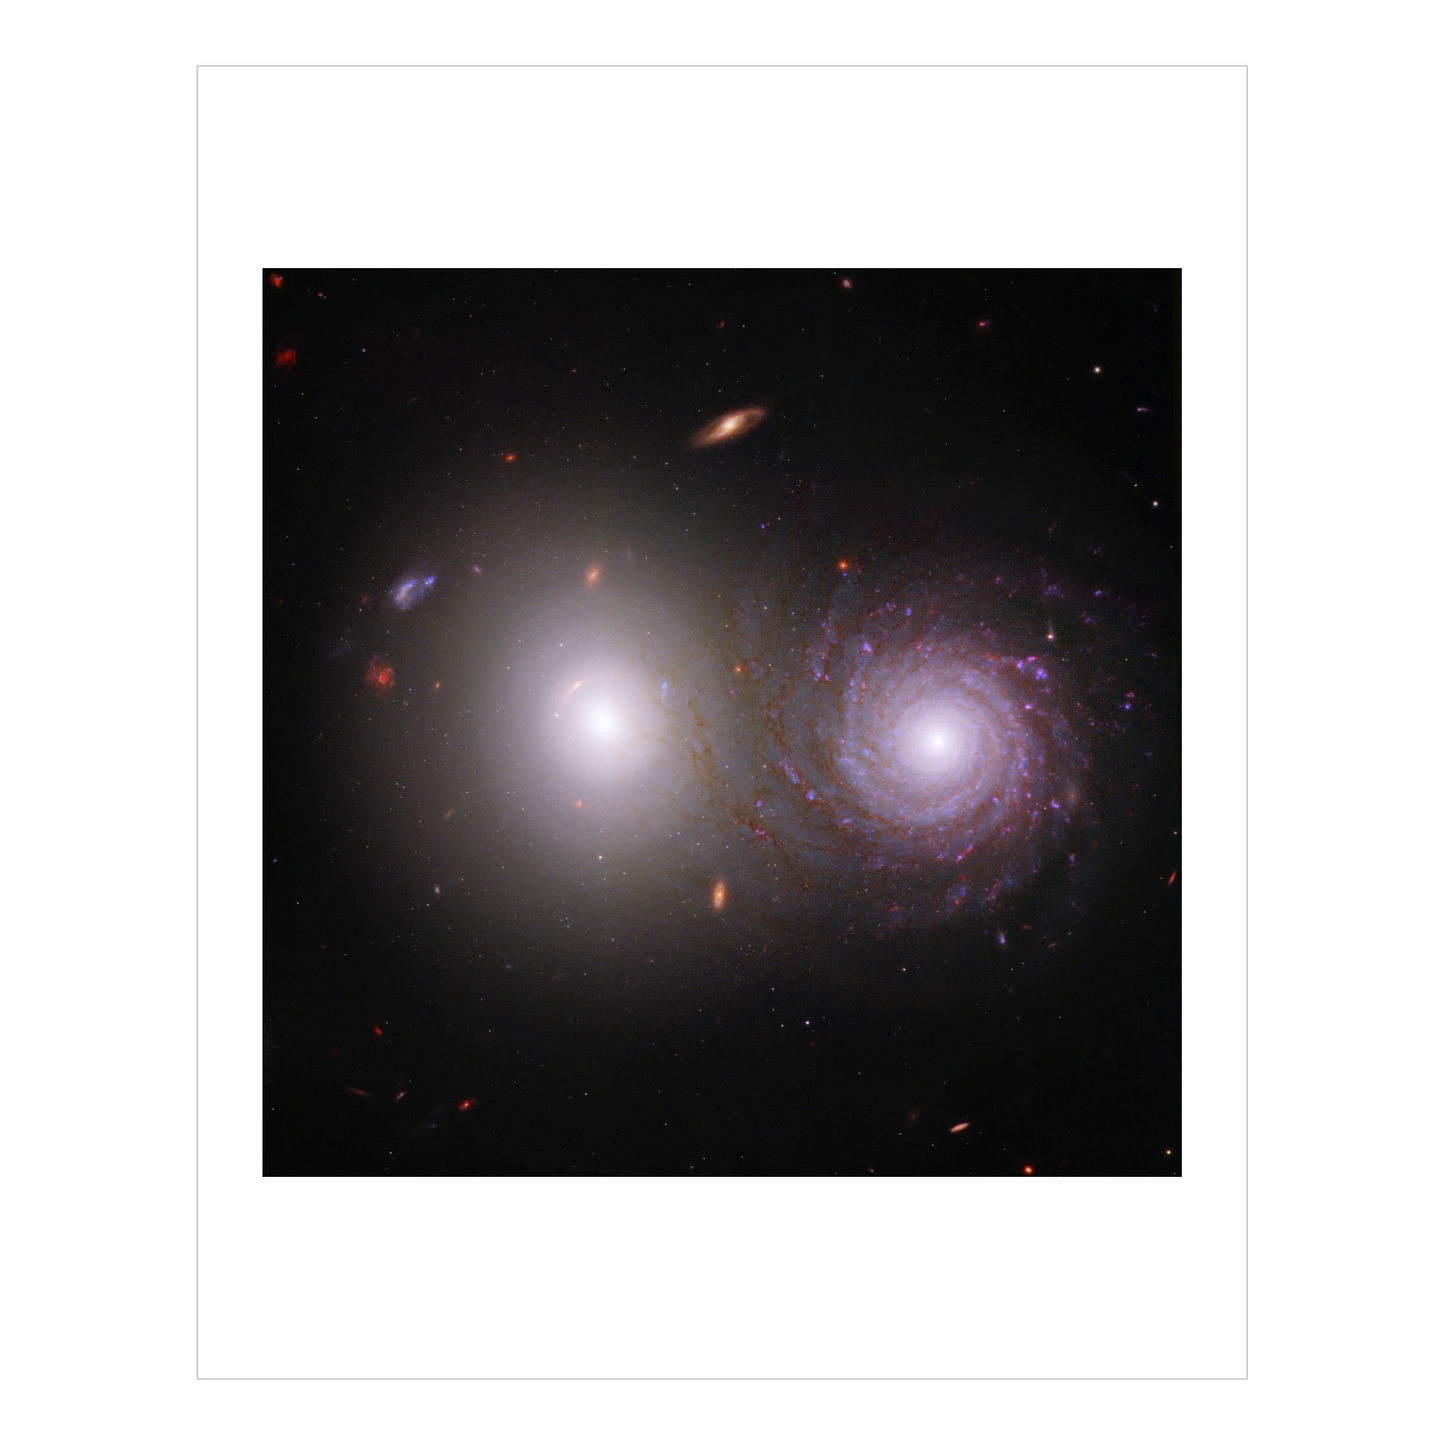 Galaxy Pair VV 191 - Webb and Hubble Composite